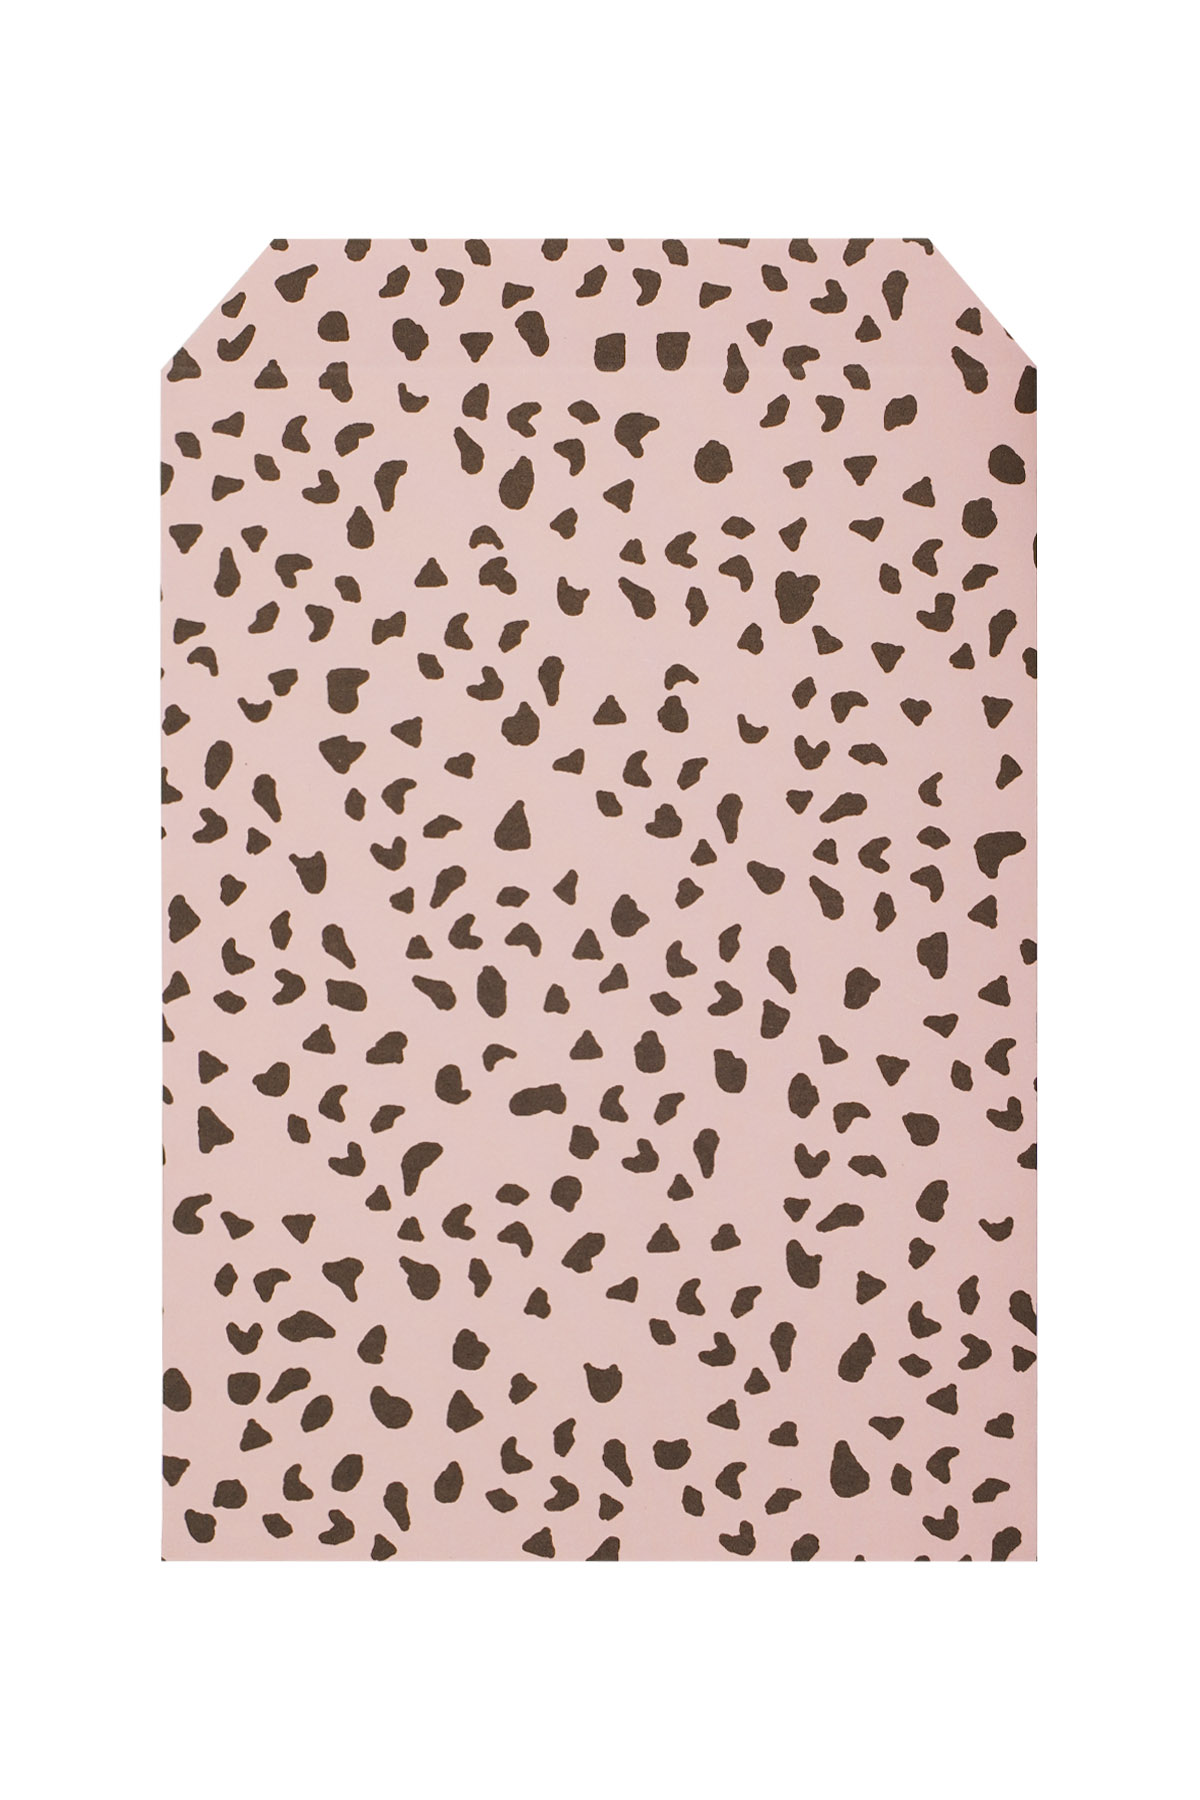 Jewelery envelope with dots pink 